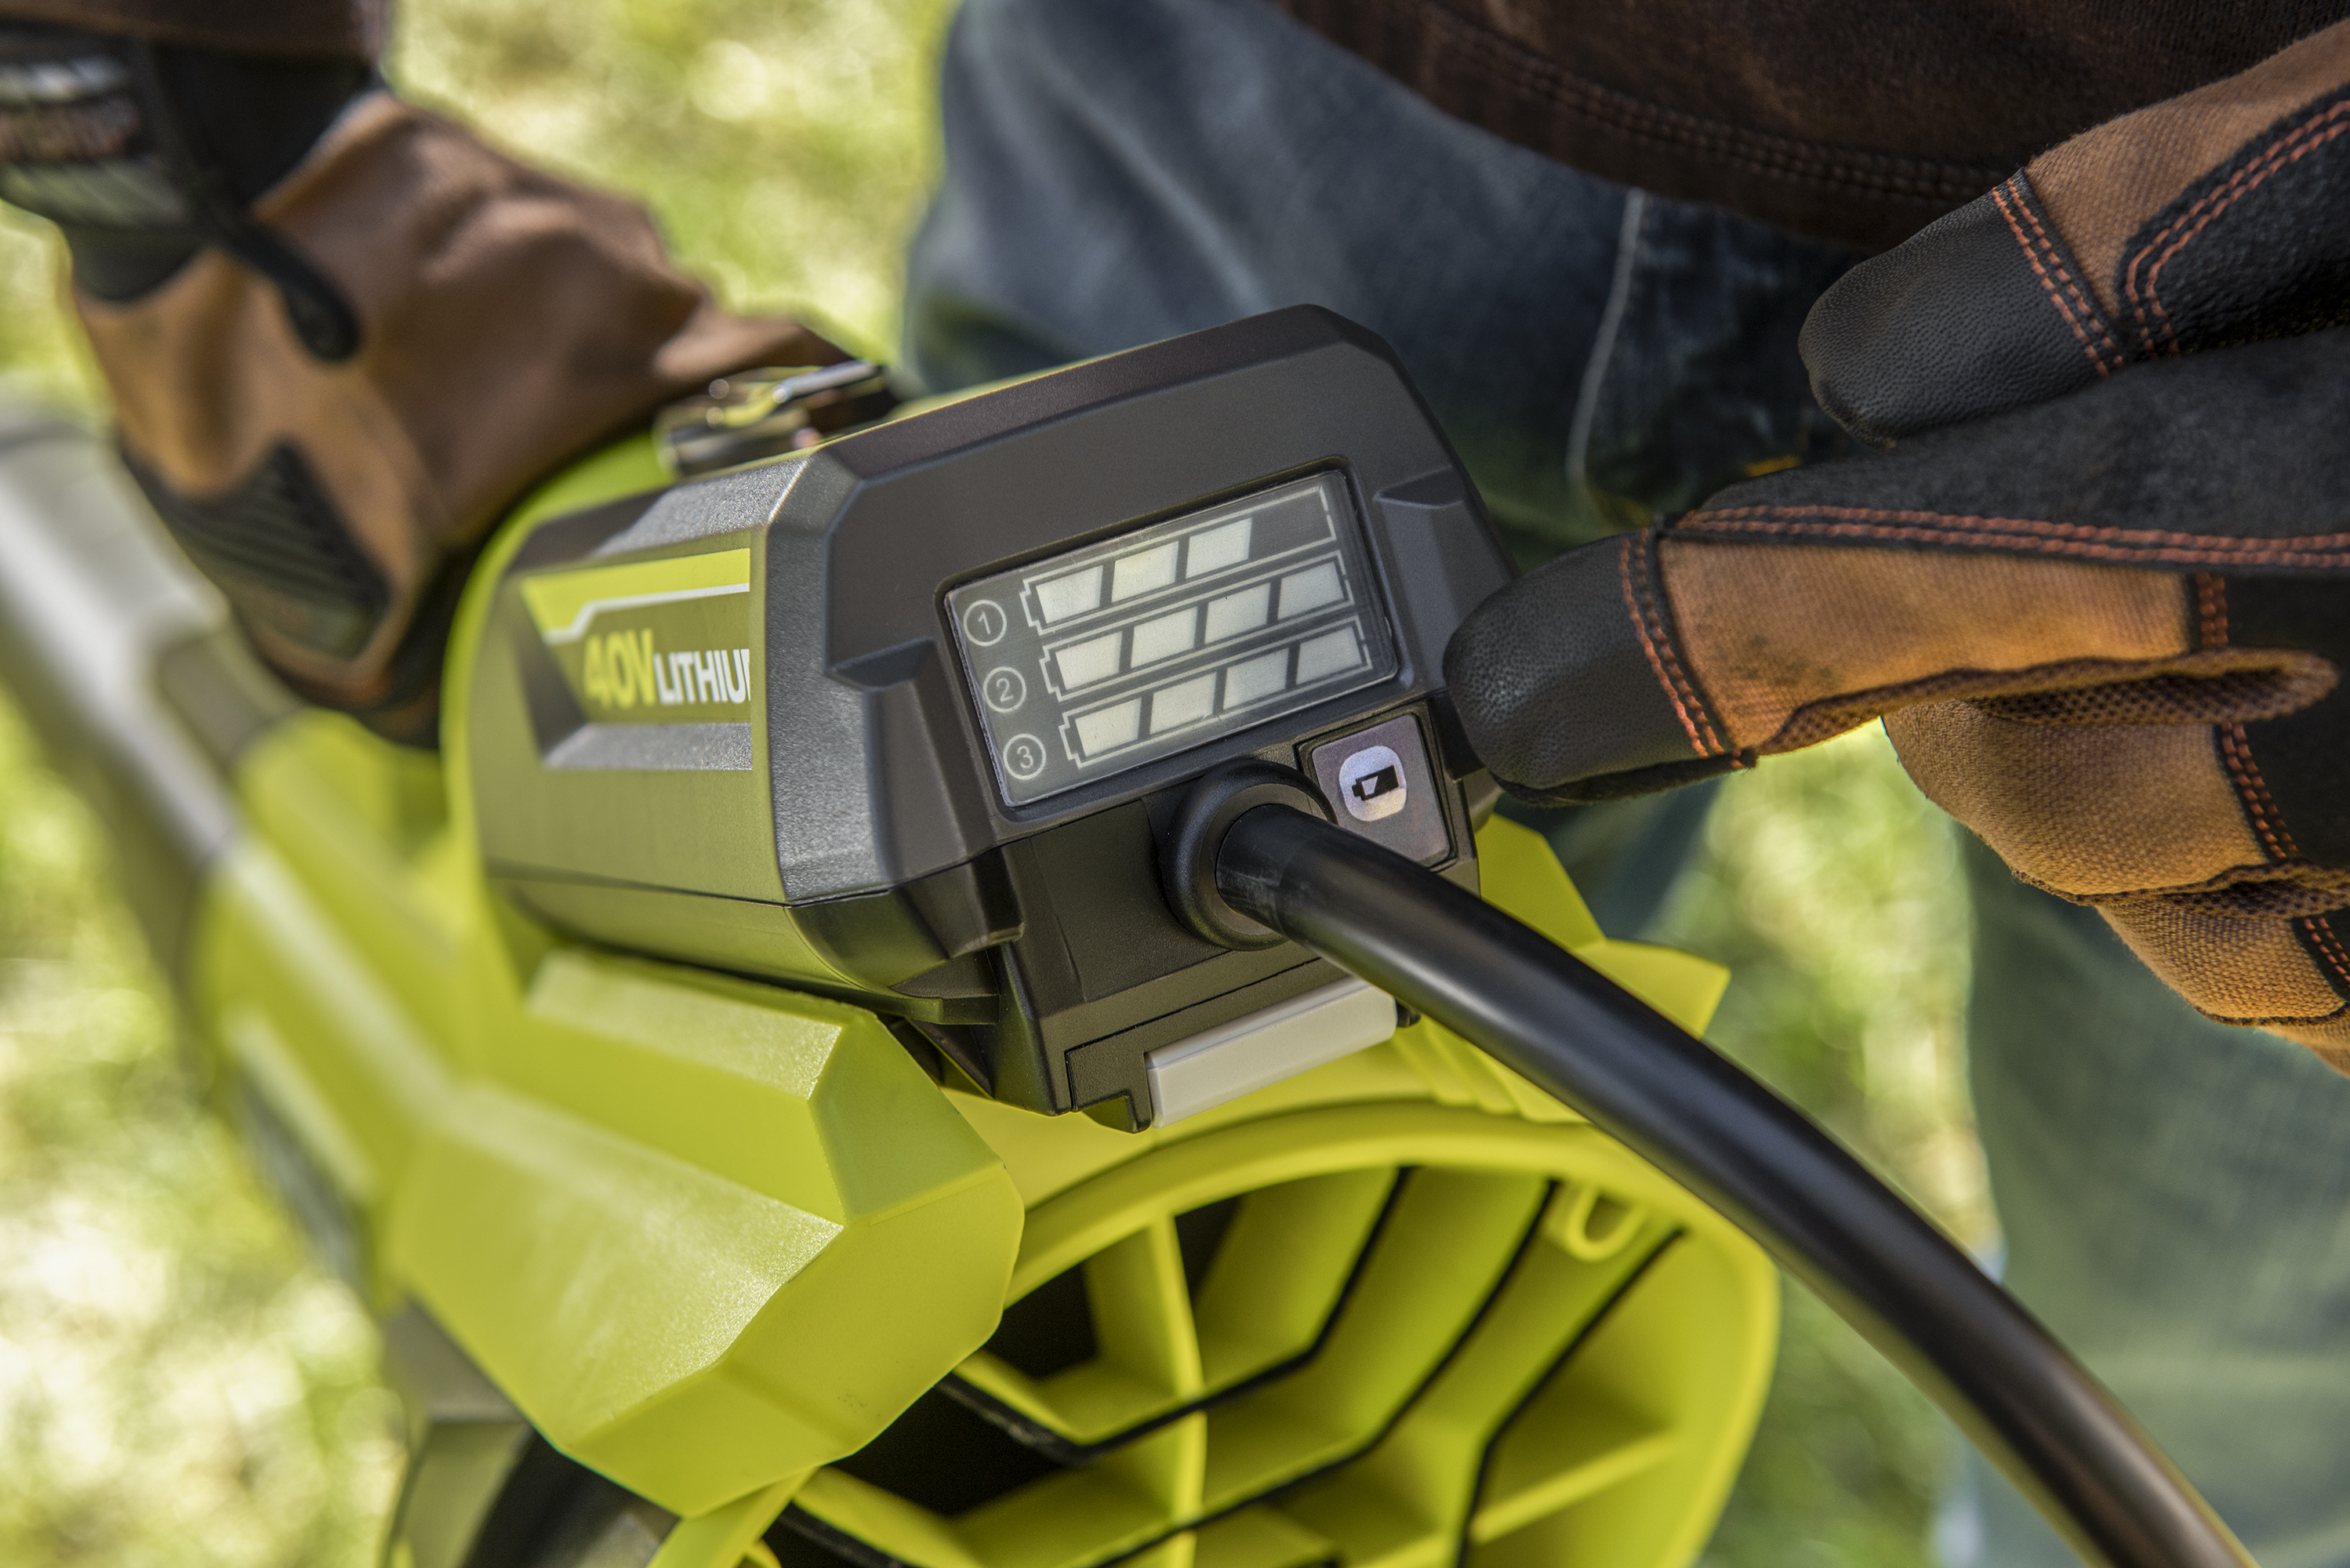 Connects to Other Select RYOBI 40V Handheld Tools